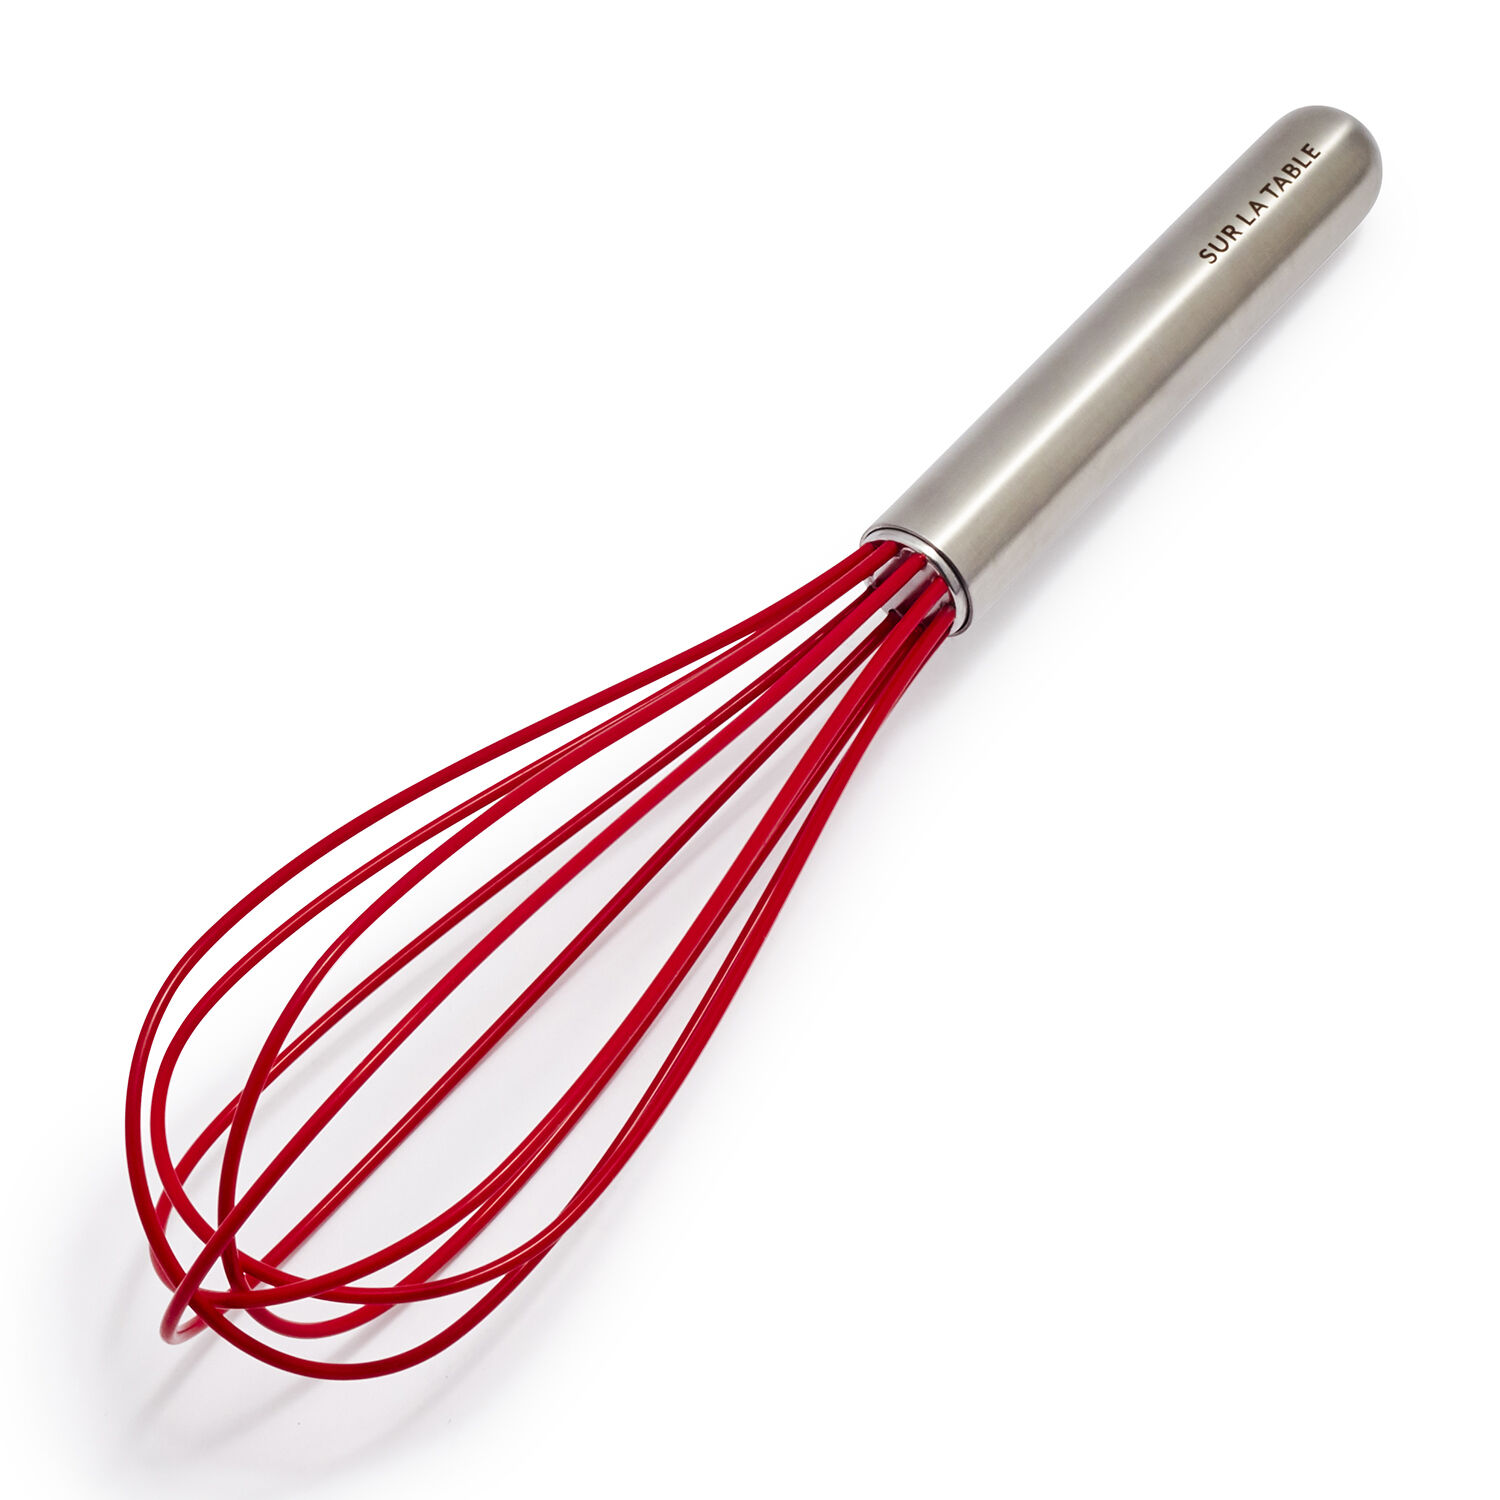 Silicone Mini Whisk Wisk Stainless Steel Utensil Kitchen Baking Professional New